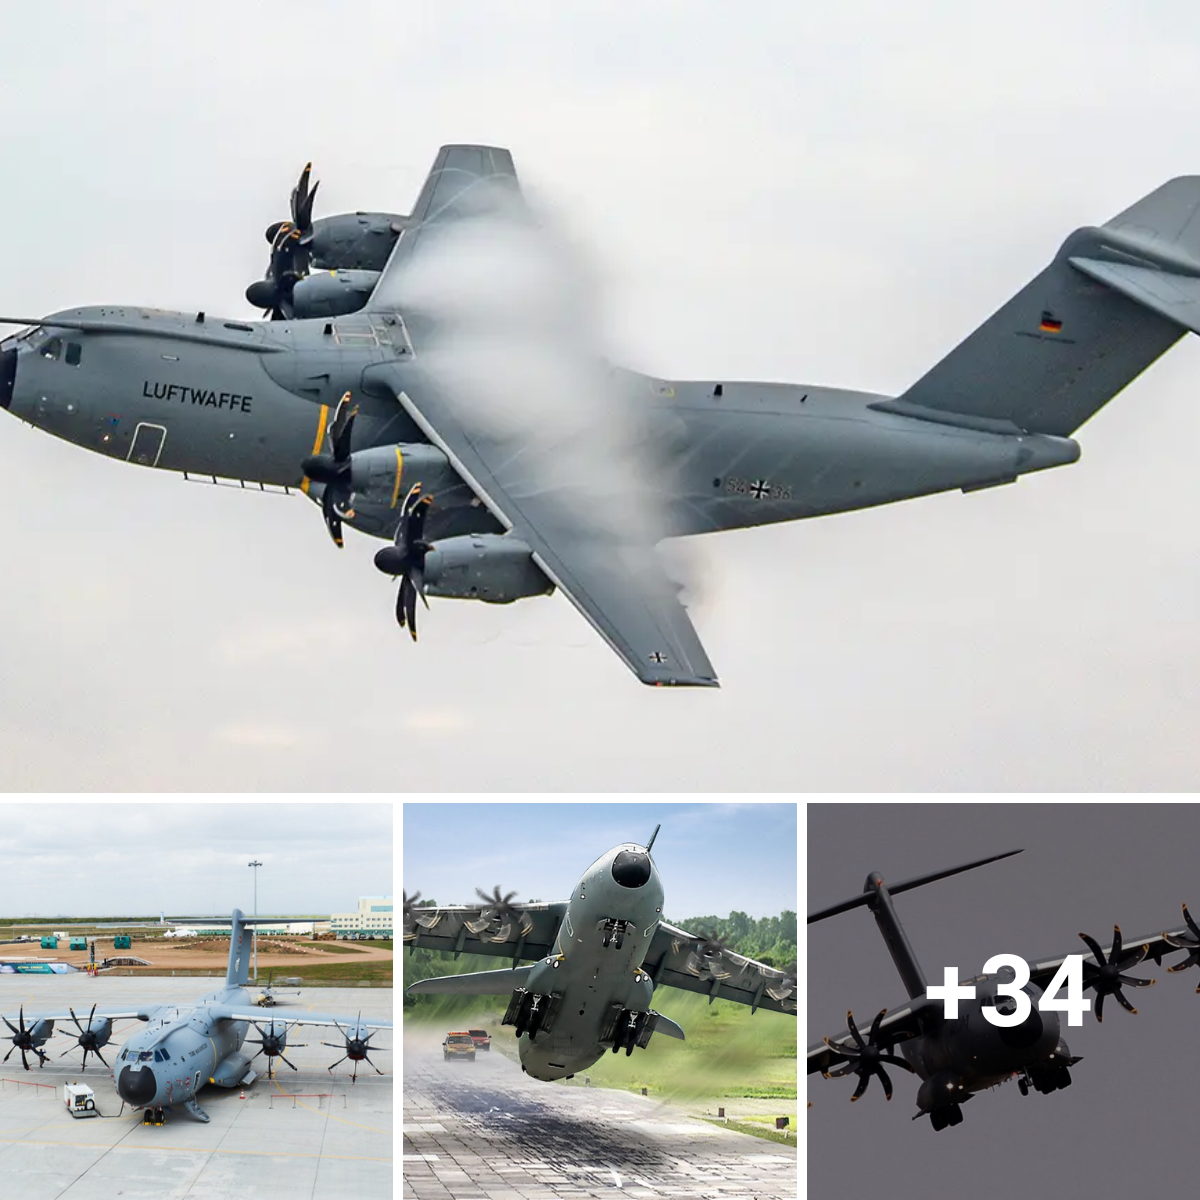 A400M engines were pushed to their absolute limit in incredible short takeoff testing.